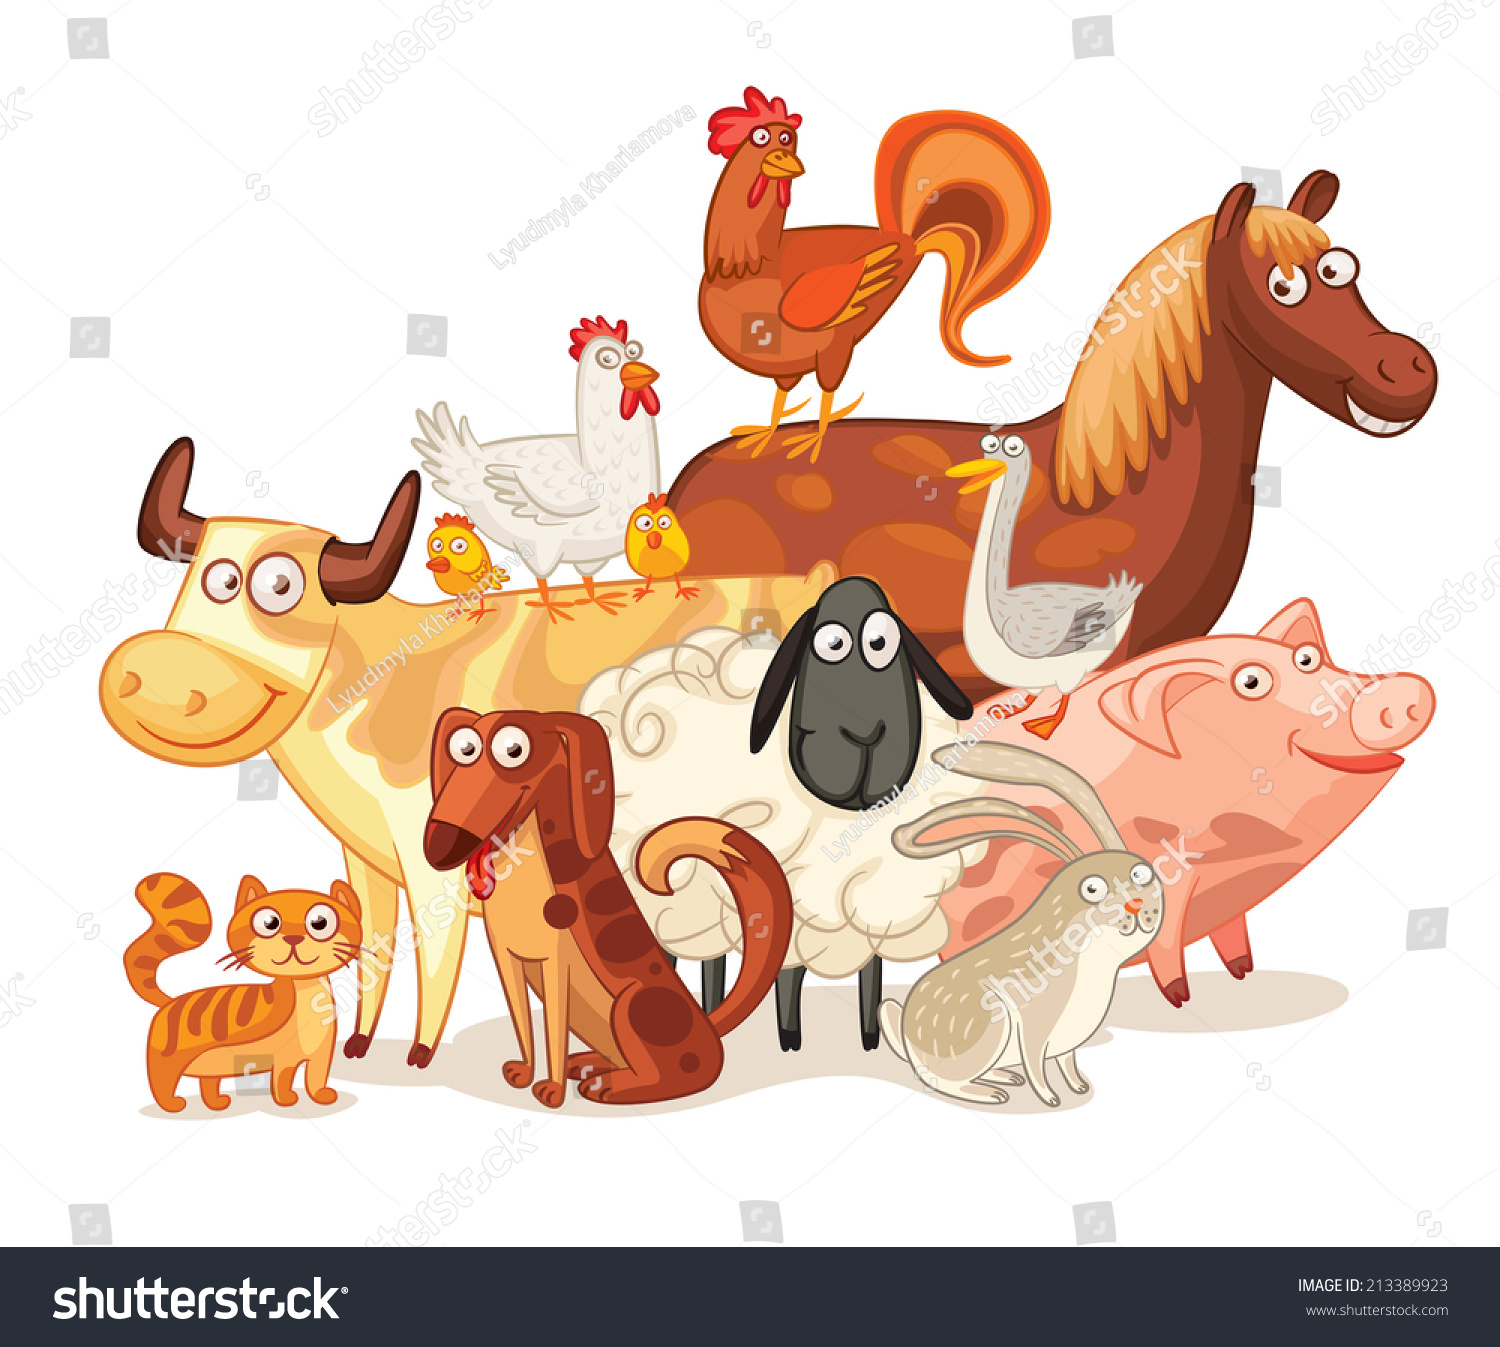 clipart of animals together - photo #43